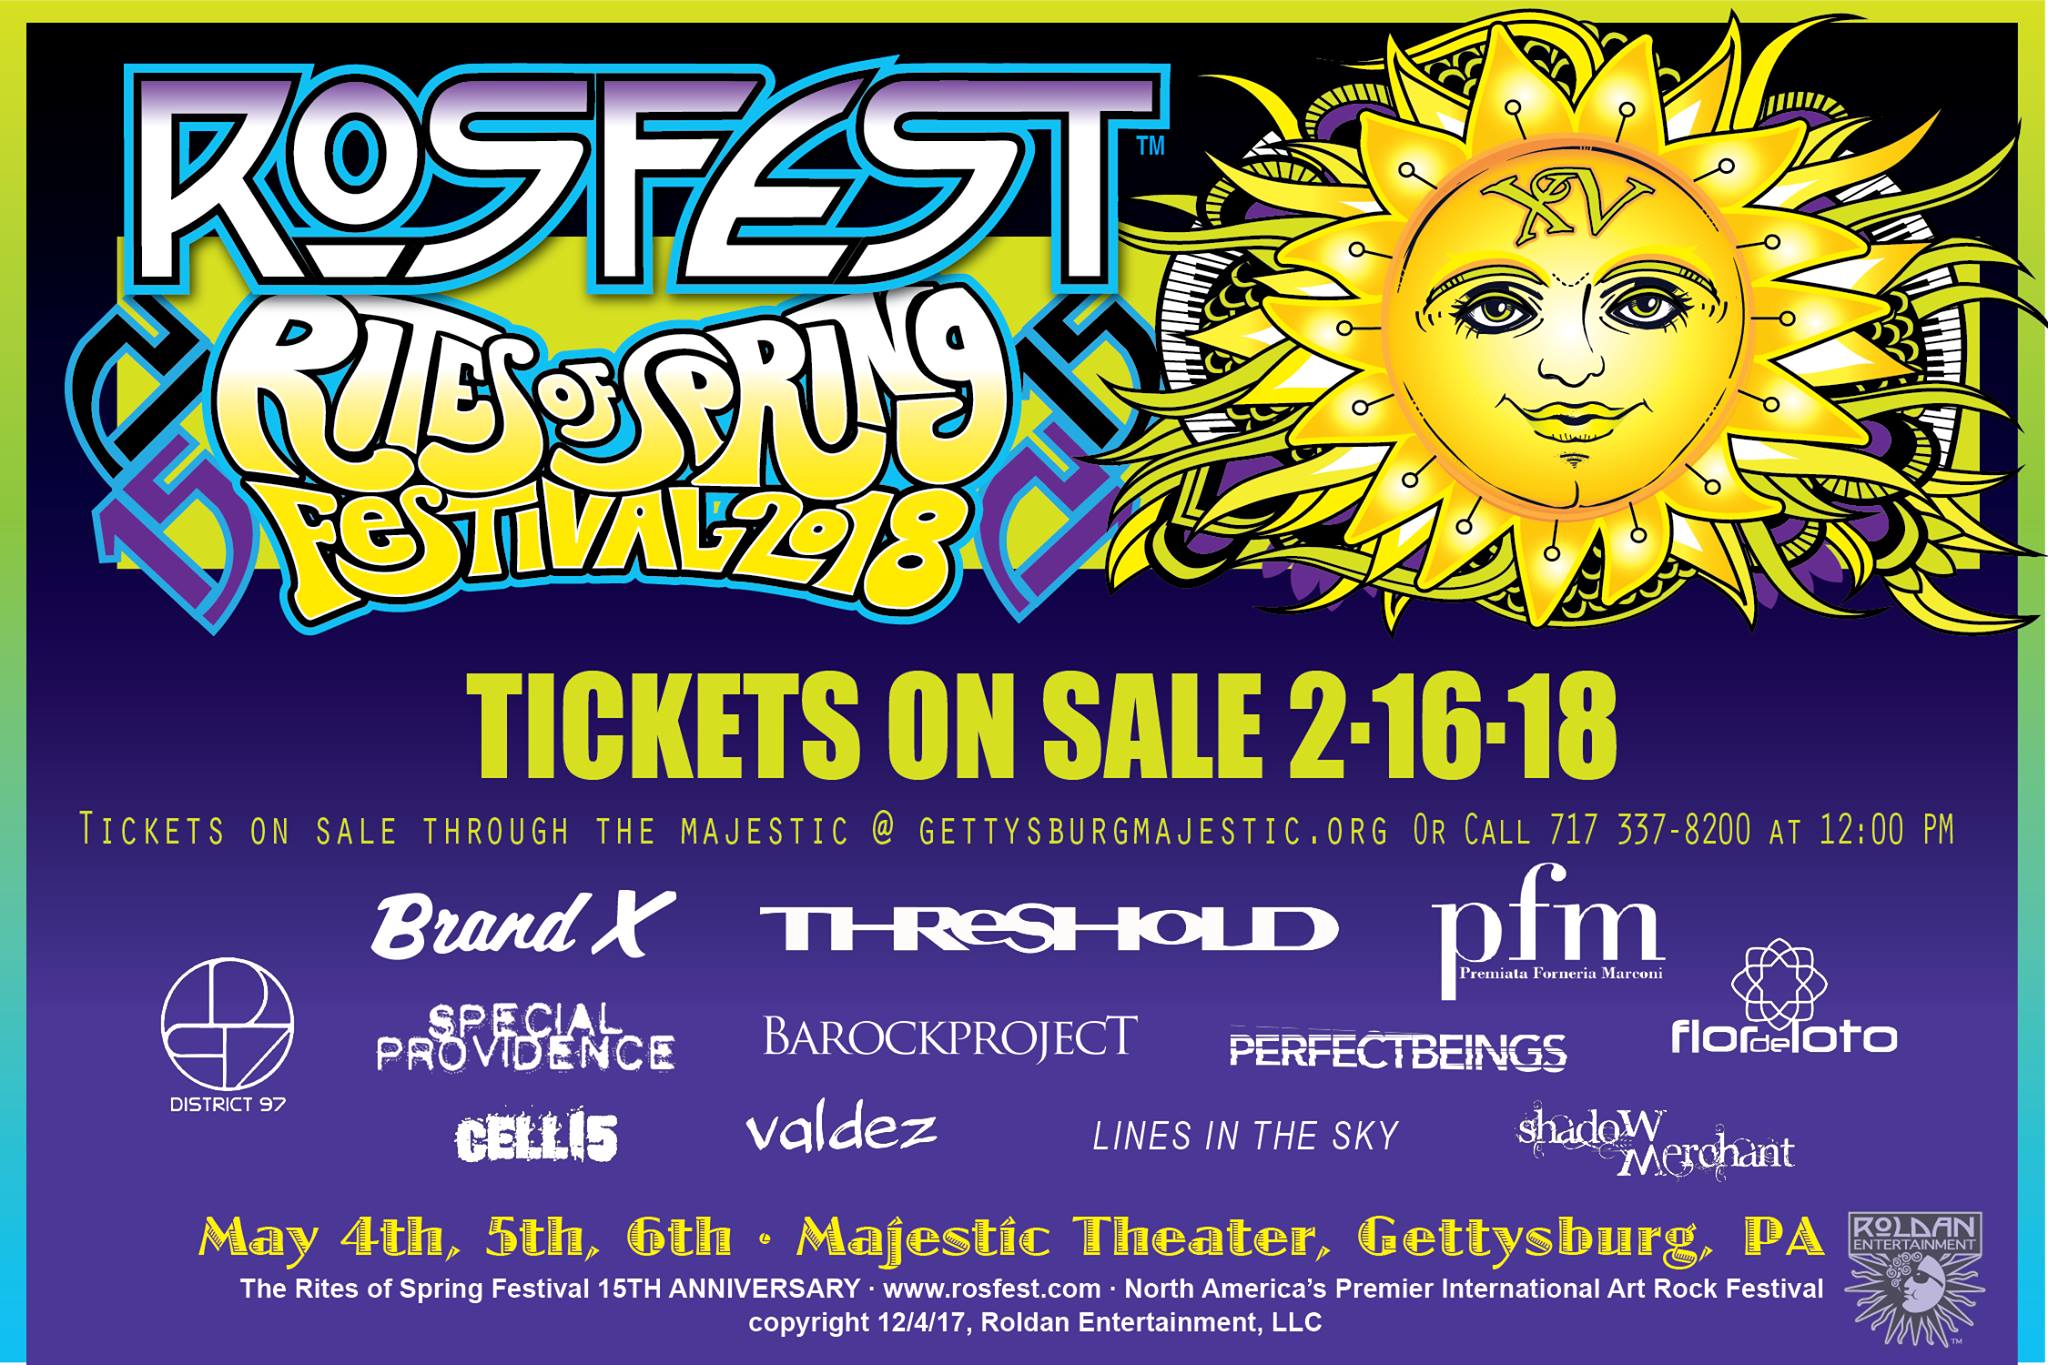 RoSfest 3 Day Pass On Sale Now! Power of Prog